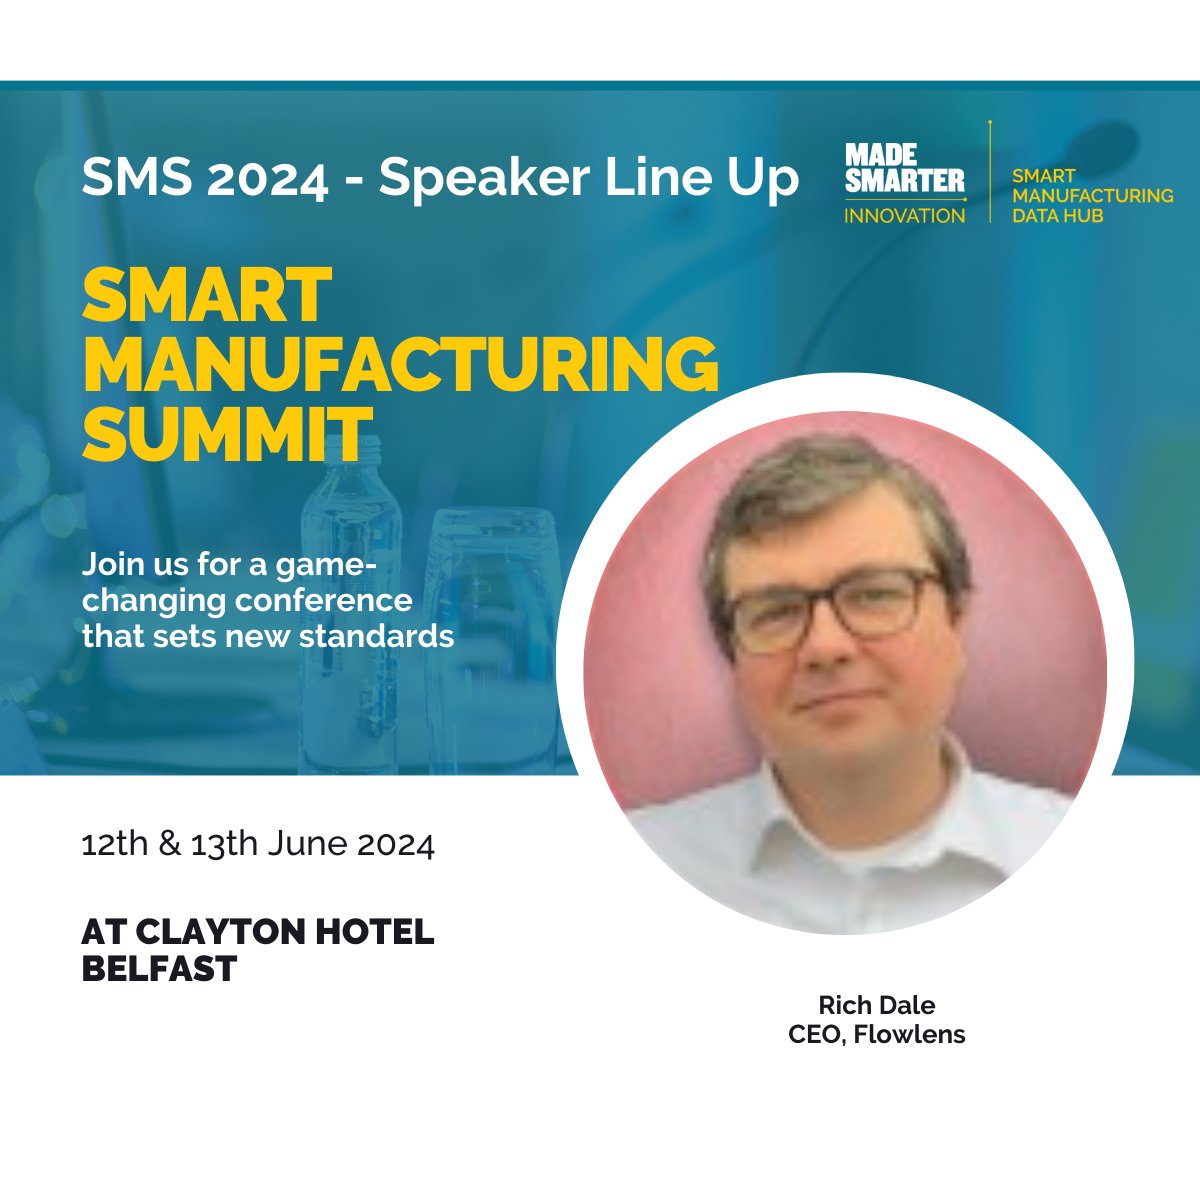 ⭐ Rich Dale from Flowlens Manufacturing CRM & MRP Software is speaking at the SMS24 in June.

Register here for the Earlybird rate: eu1.hubs.ly/H08ShkL0